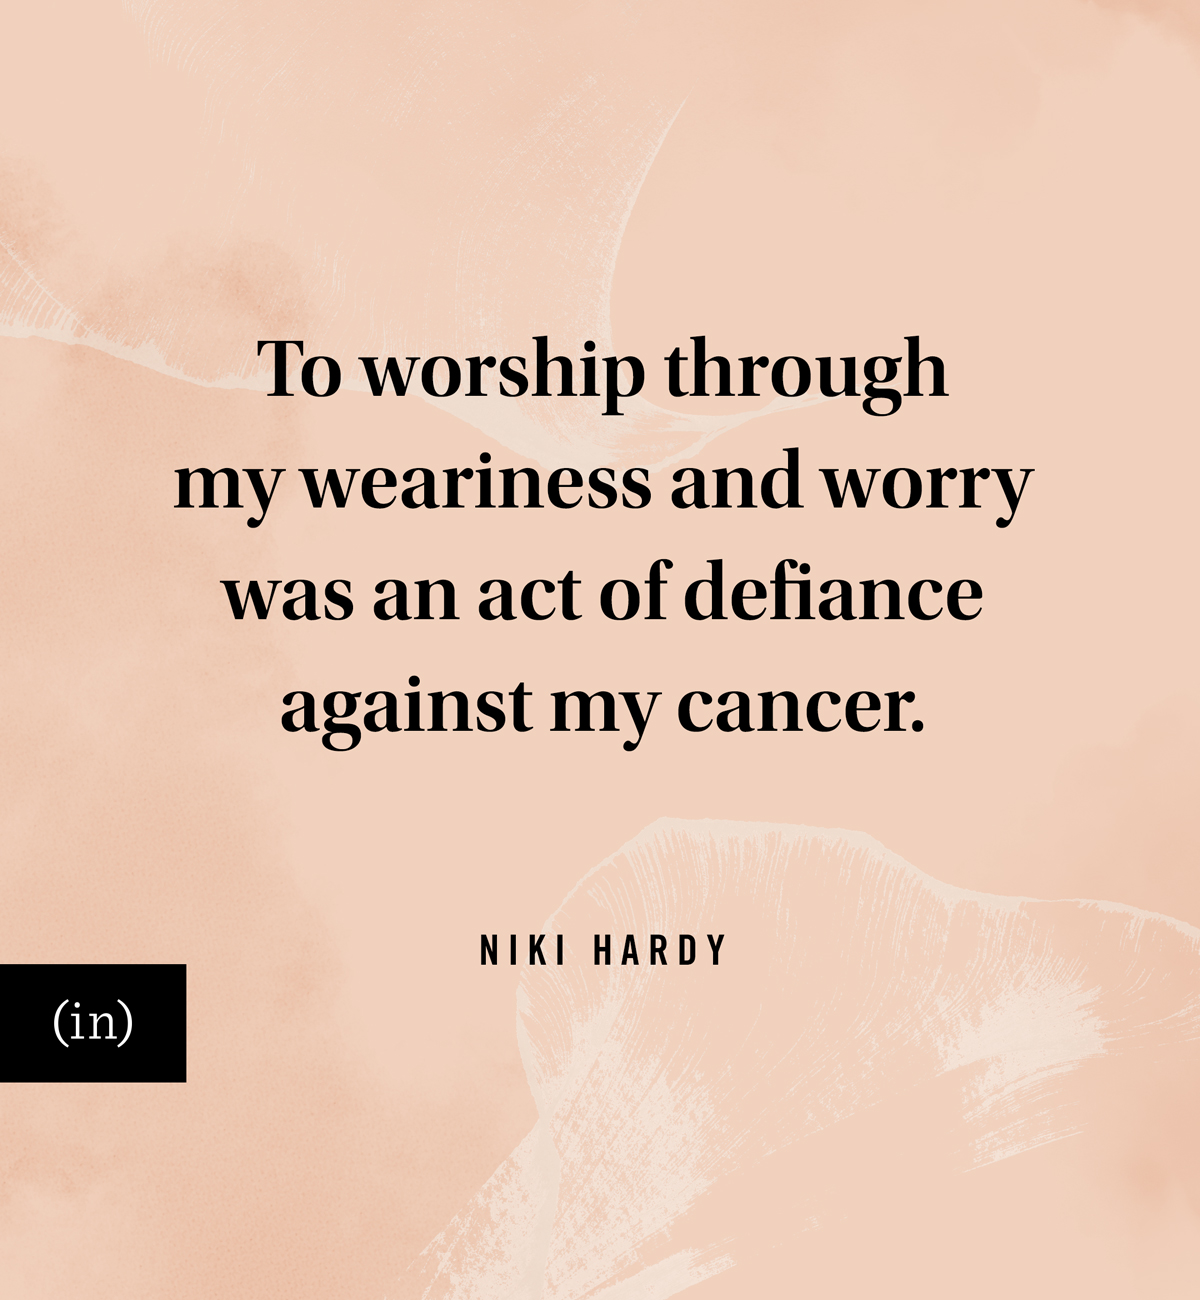 To worship through my weariness and worry was an act of defiance against my cancer. -Niki Hardy